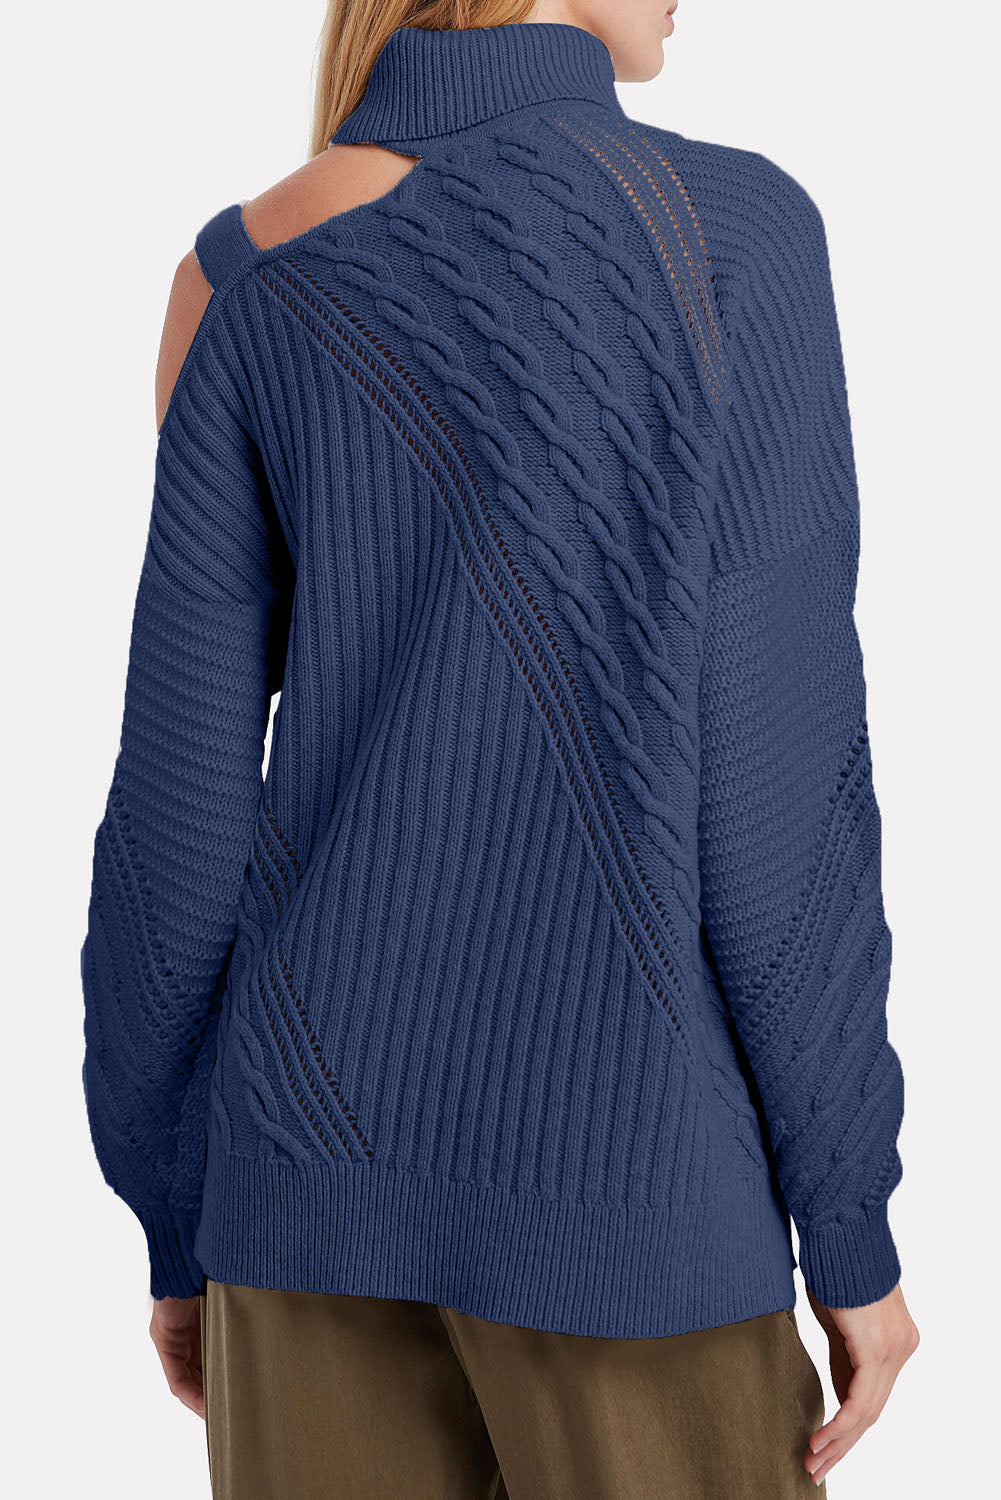 Women's  Strapped Cut Out Shoulder Knitted Top Solid Color Turtleneck Sweater